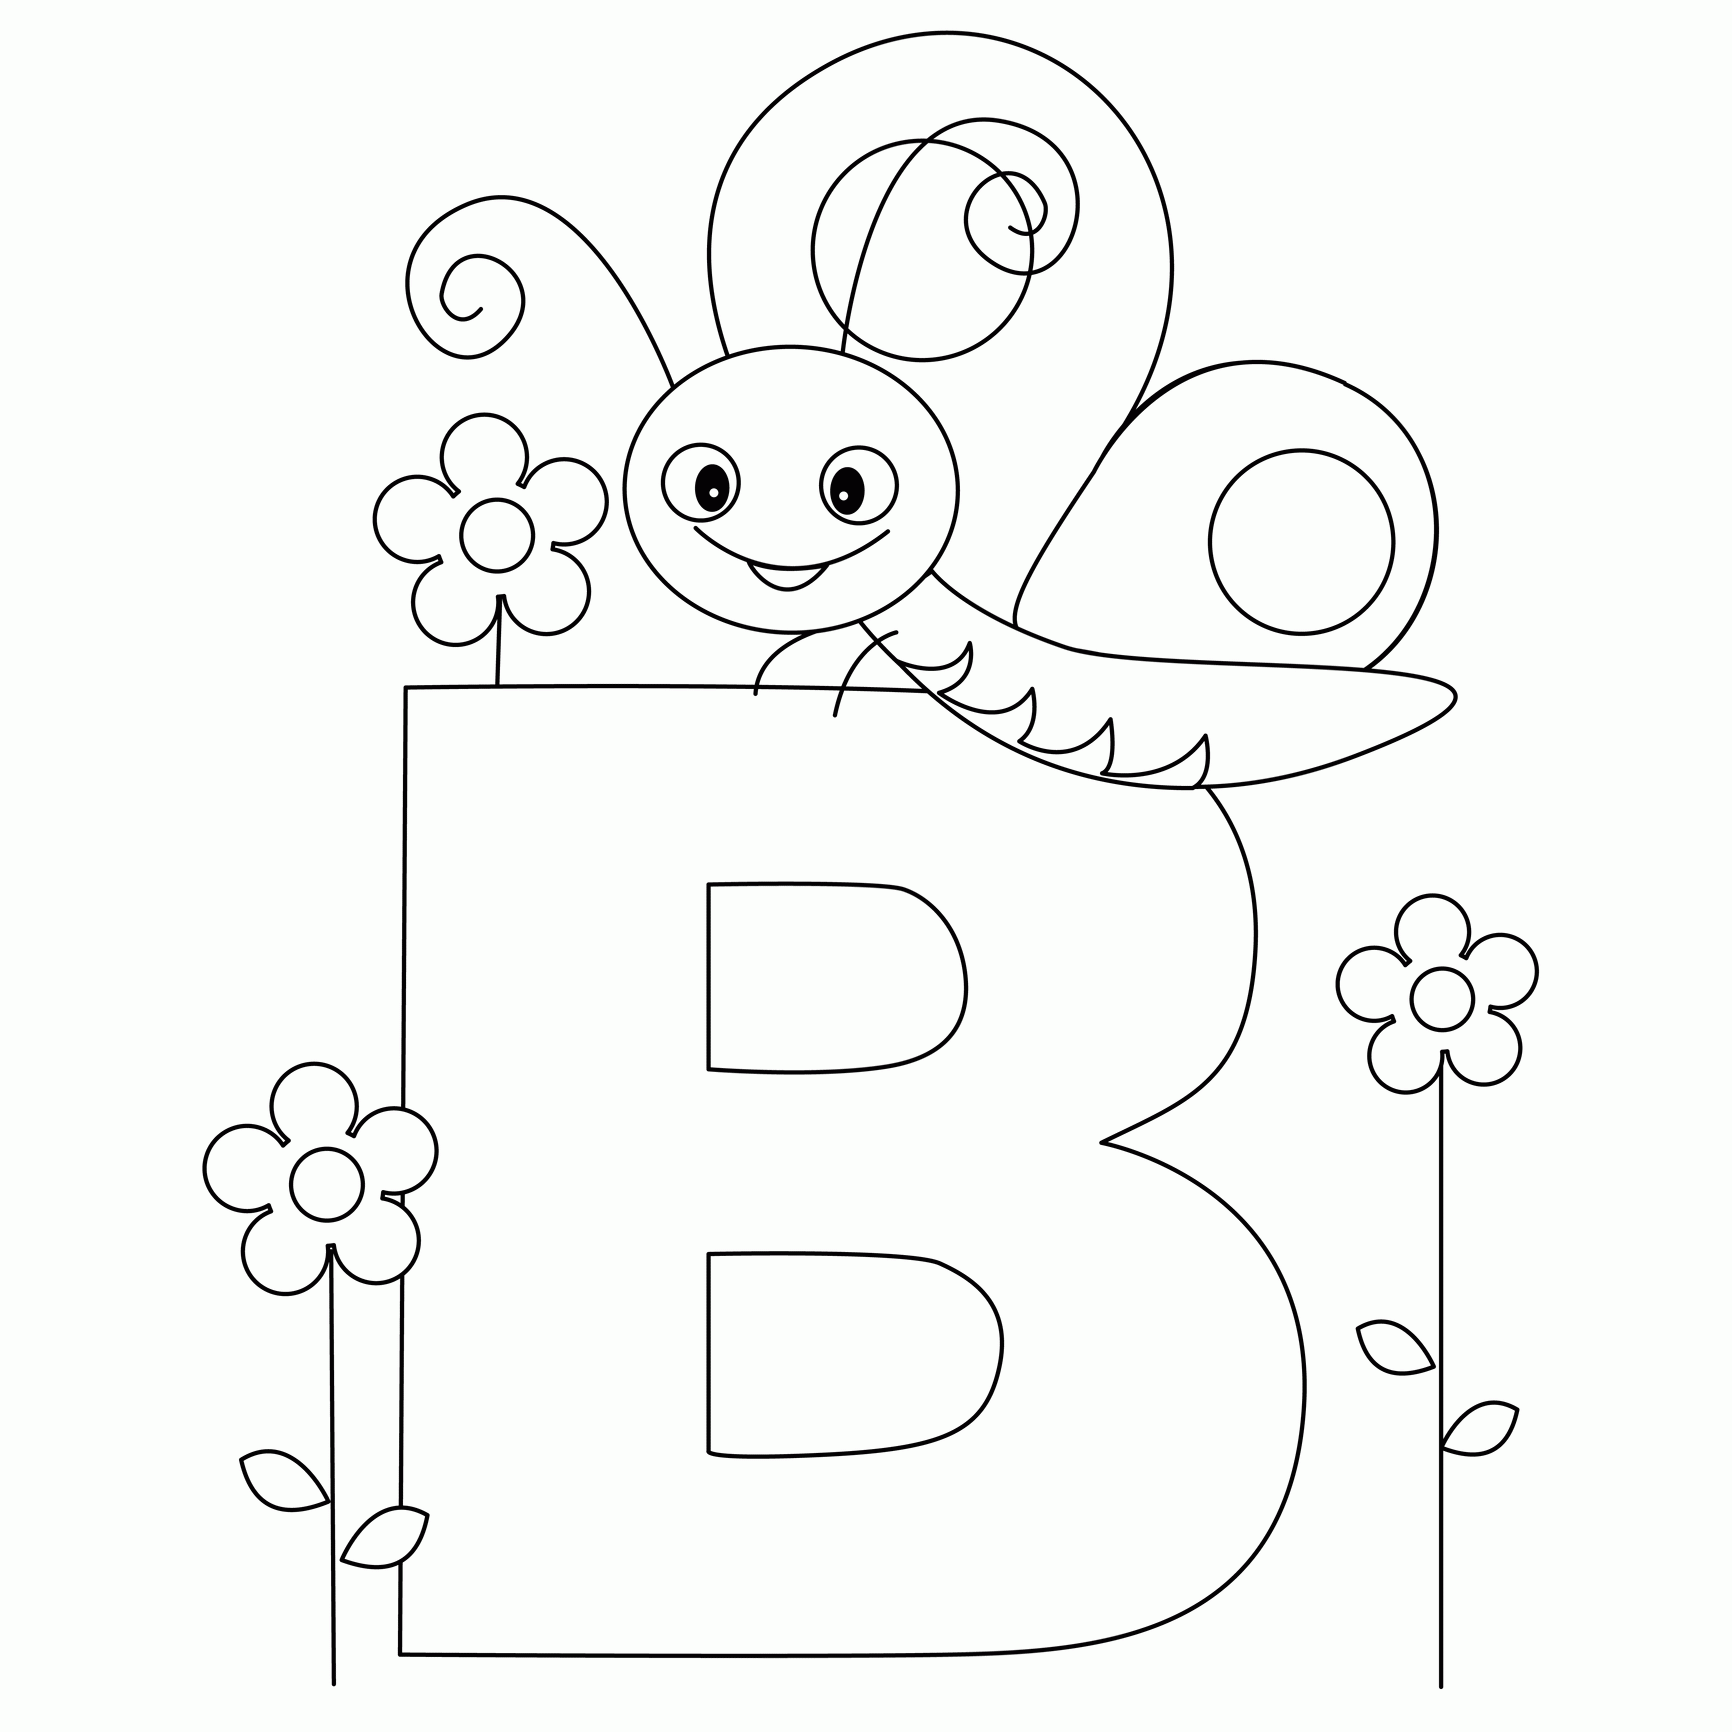 Abc Coloring Pages Free Printable - High Quality Coloring Pages